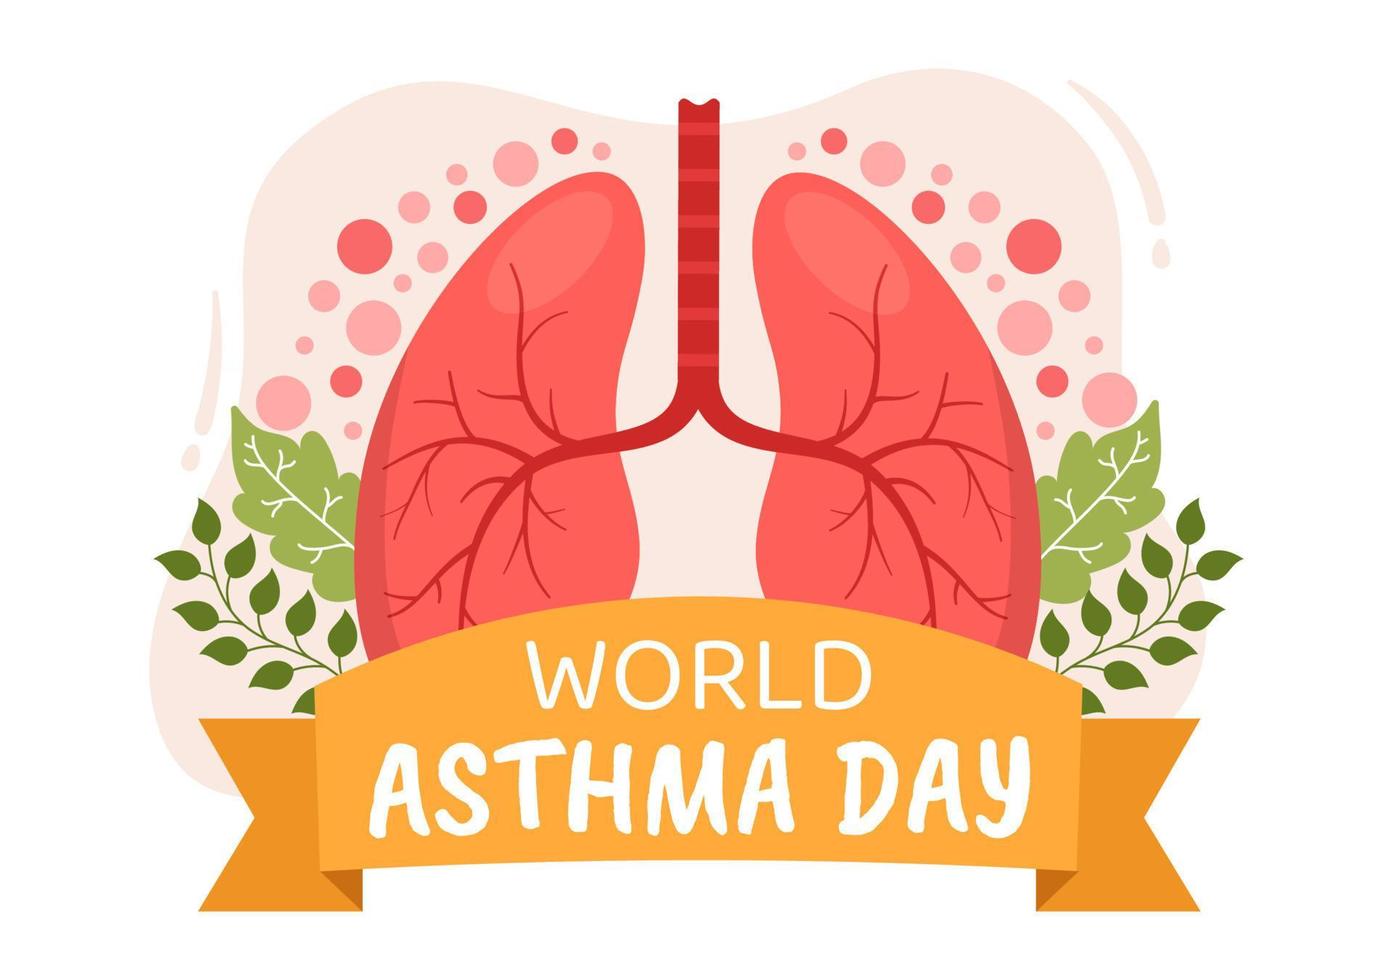 World Asthma Day on May 2 Illustration with Inhaler and Health Prevention Lungs in Flat Cartoon Hand Drawn for Web Banner or Landing Page Templates vector